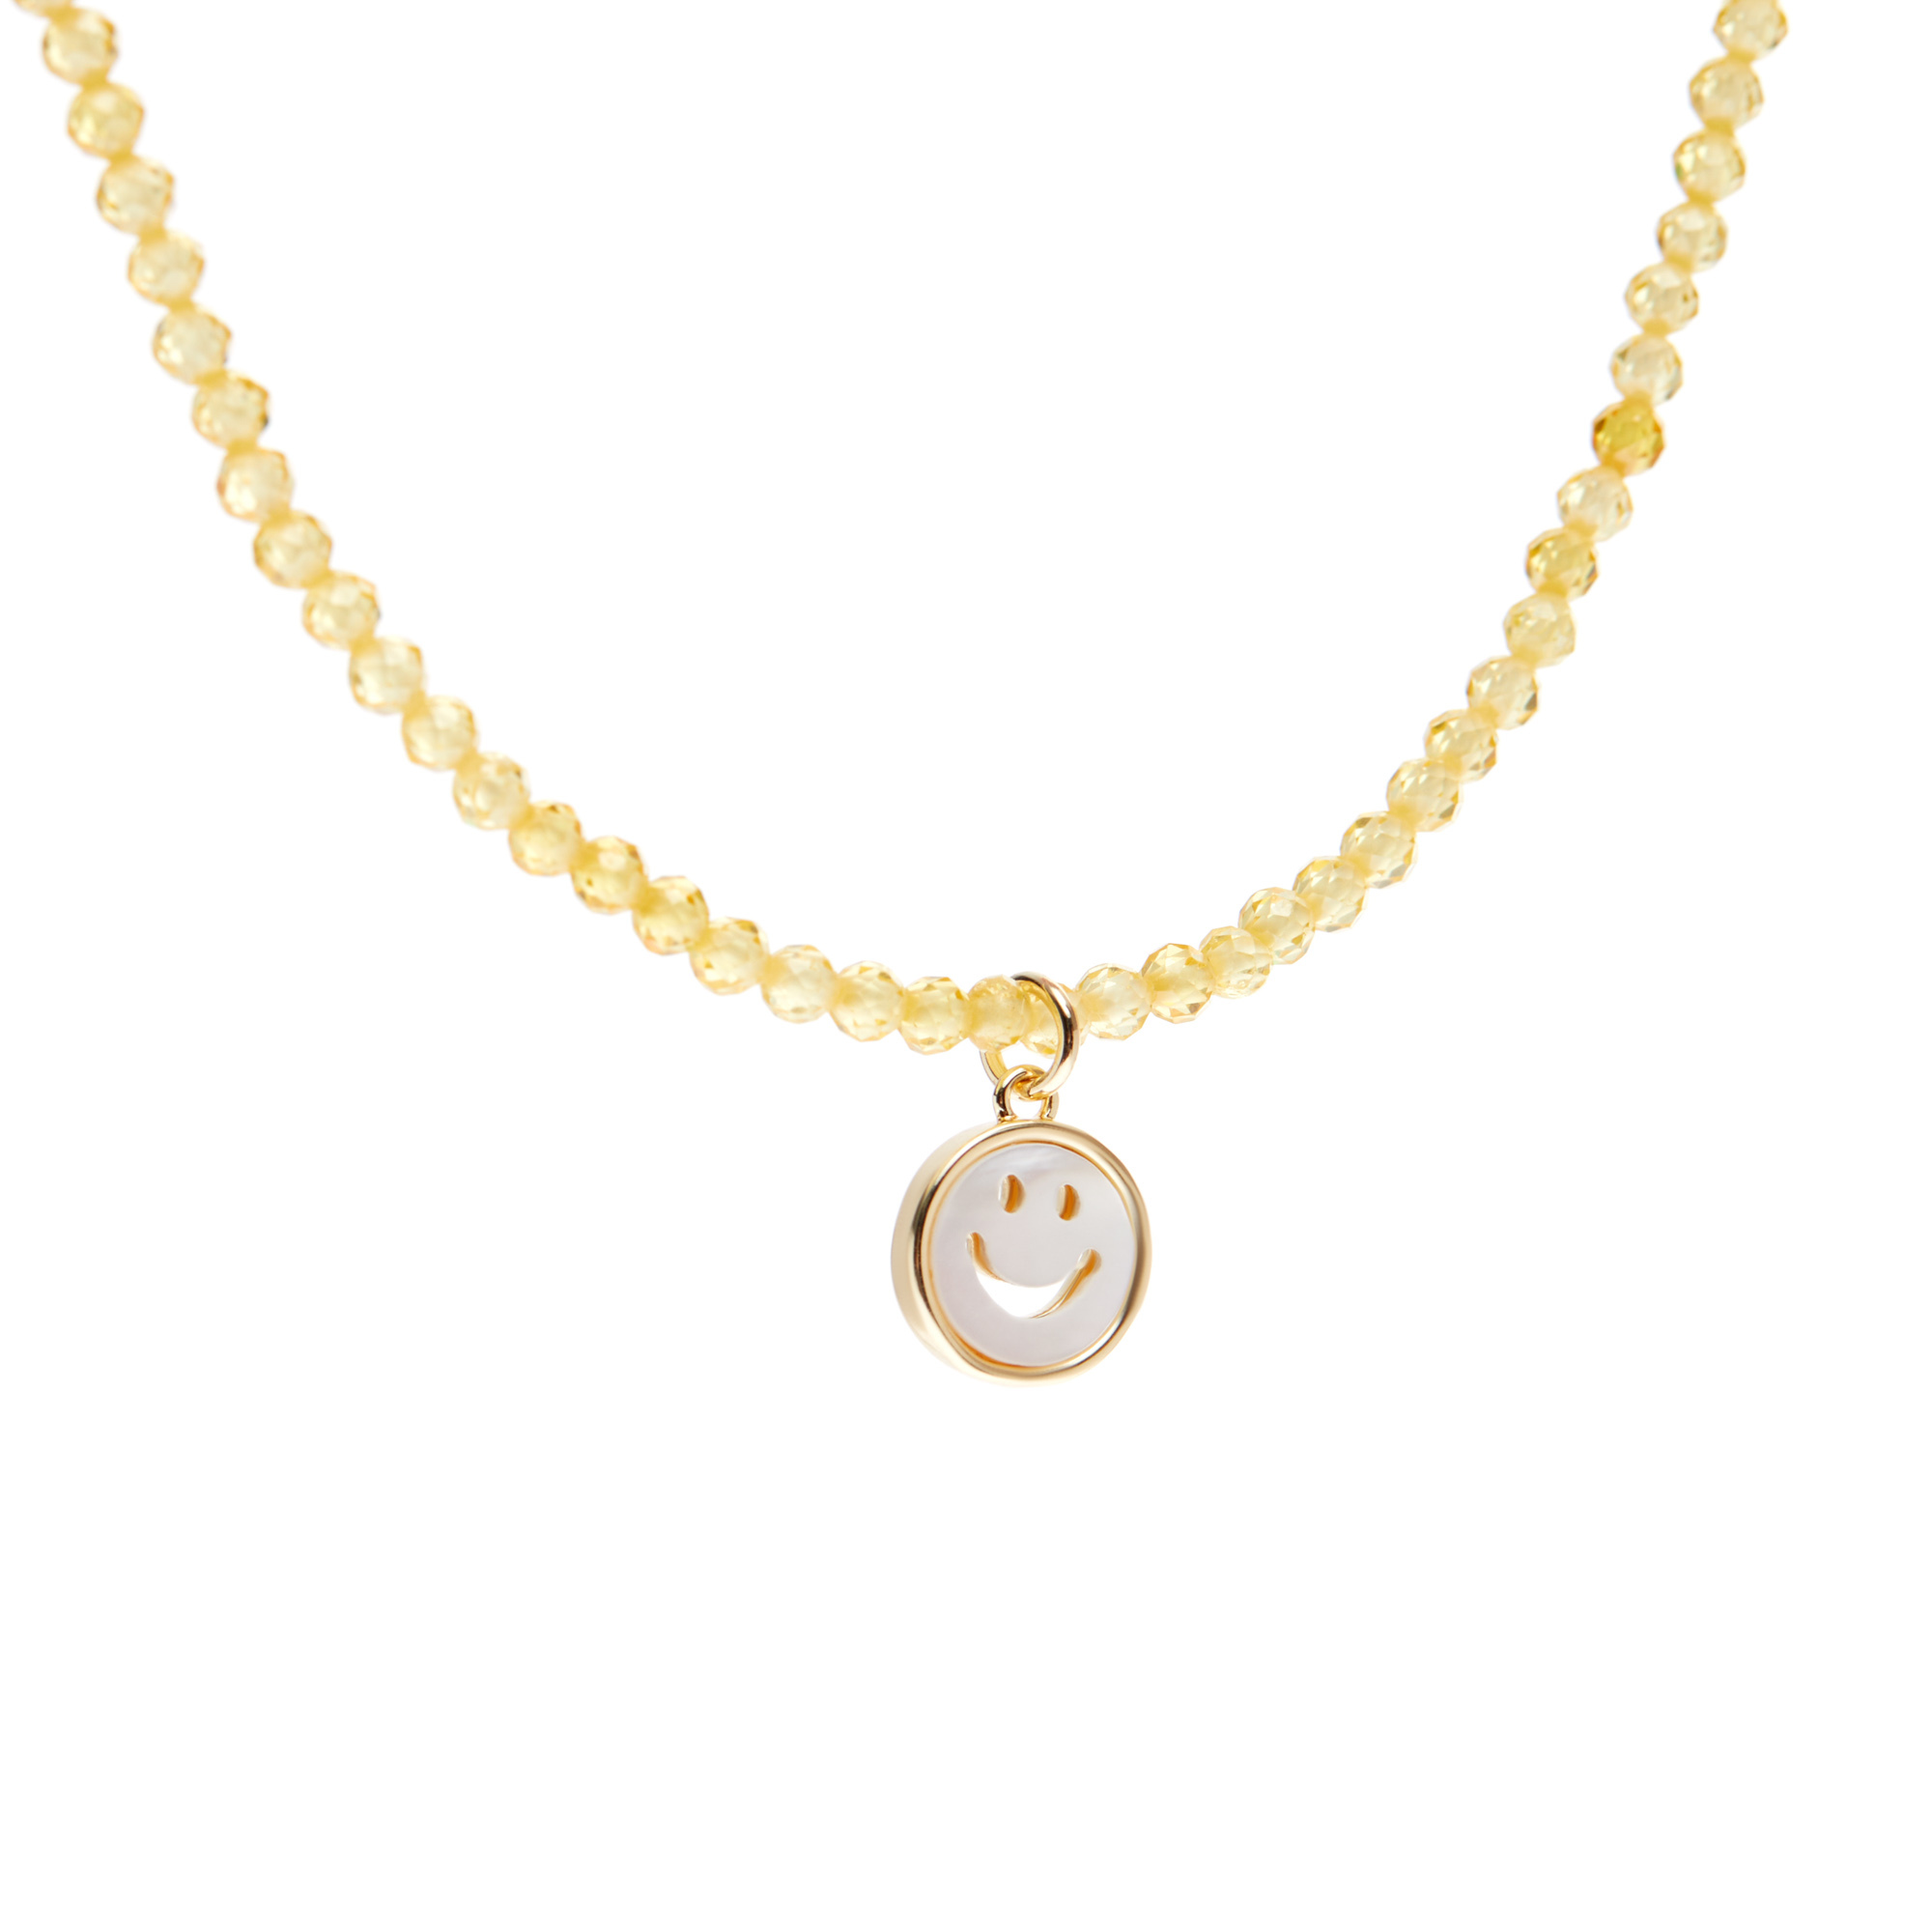 HOLLY JUNE Колье Sunny Smile Necklace holly june колье joyfull necklace